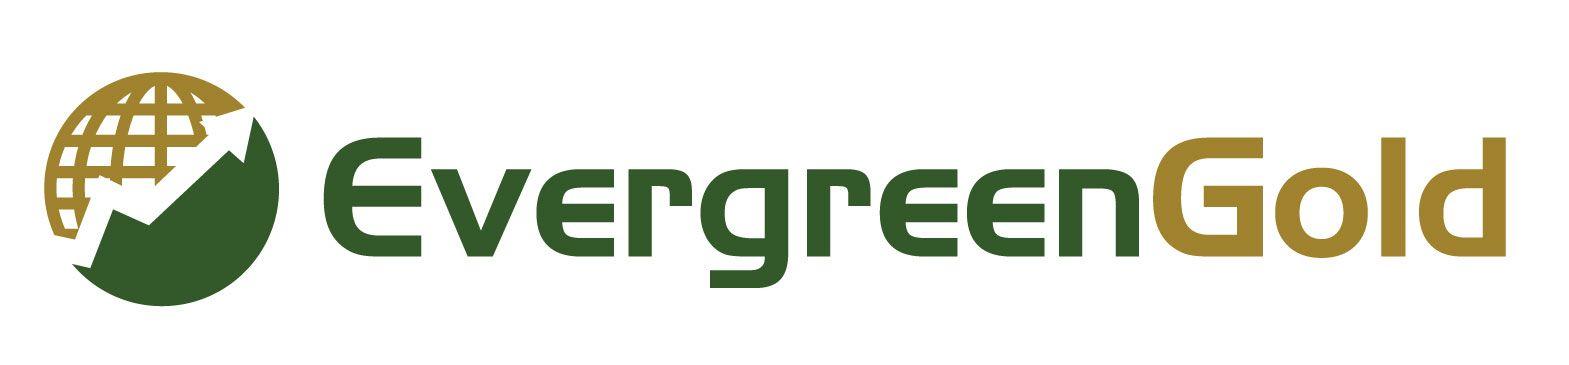 A Great Green and Gold Logo - Franchise Businesses For Sale - Evergreen Gold Business Brokers